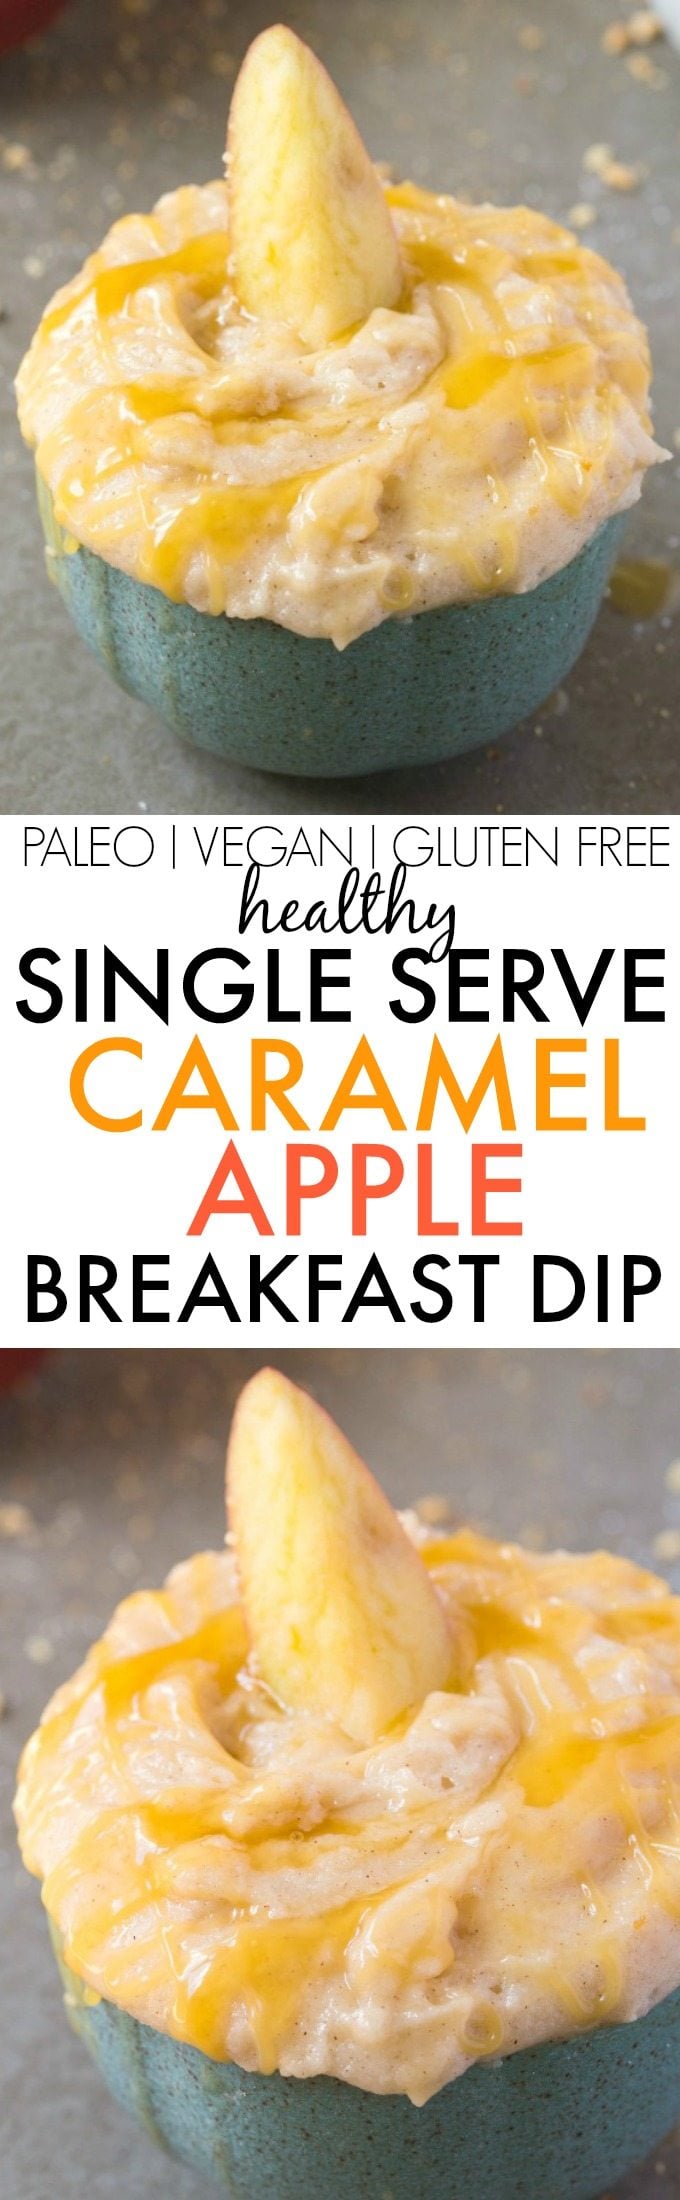 Healthy Single Serve Caramel Apple BREAKFAST Dip- Thick, creamy and secretly healthy, it's packed with protein and perfectly portioned- You just need a spoon! A quick and easy breakfast, snack or clean eating dessert flavored with caramel and apple pie spice! {vegan, gluten free, paleo, sugar free recipe}- thebigmansworld.com